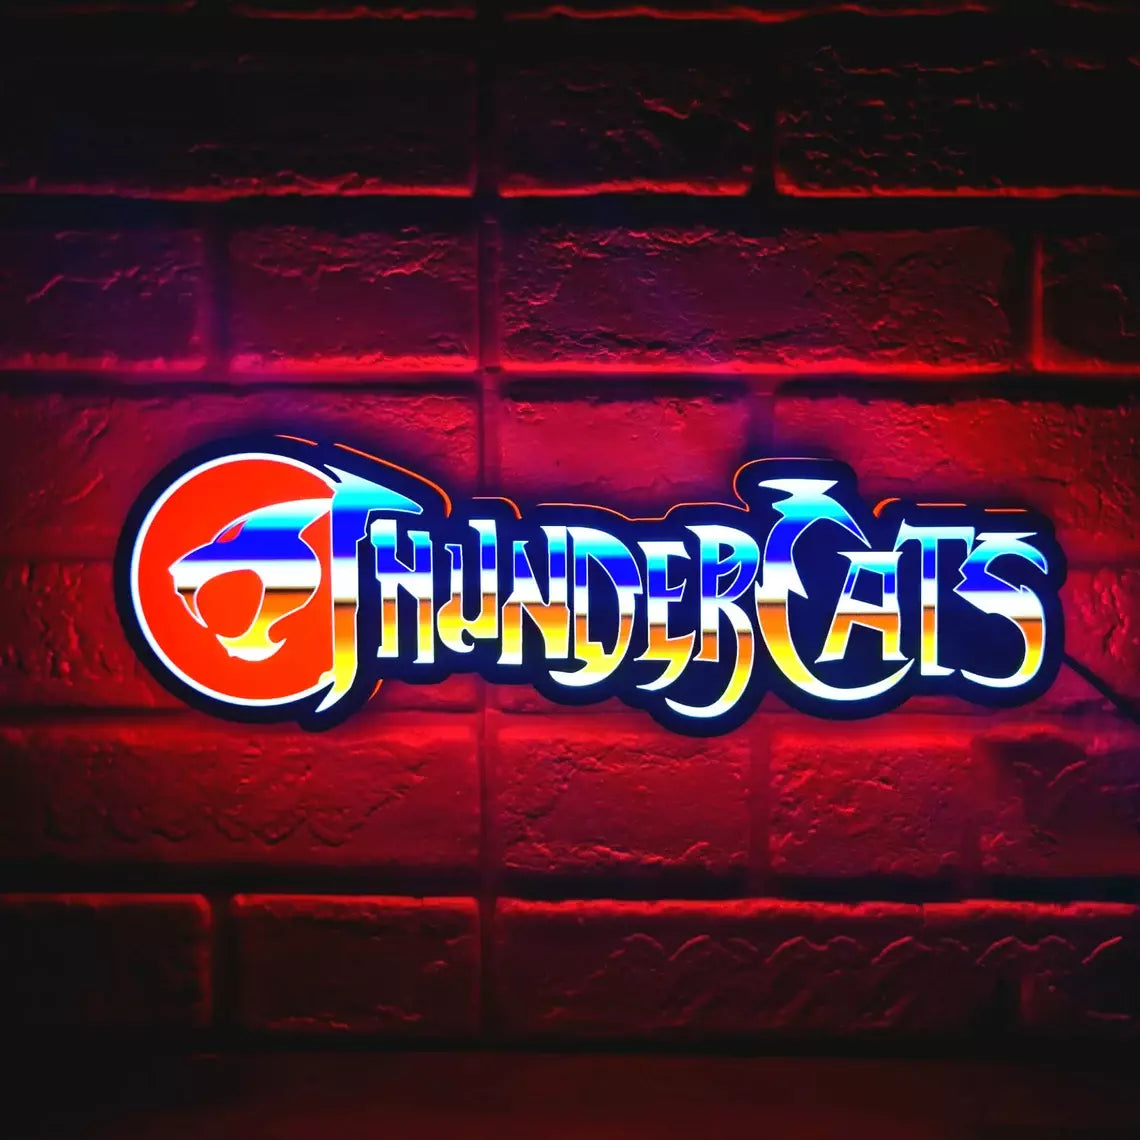 Vintage Thundercats Logo LED Sign 3D Printed, USB Powered & Full Dimmable - FYLZGO Signs